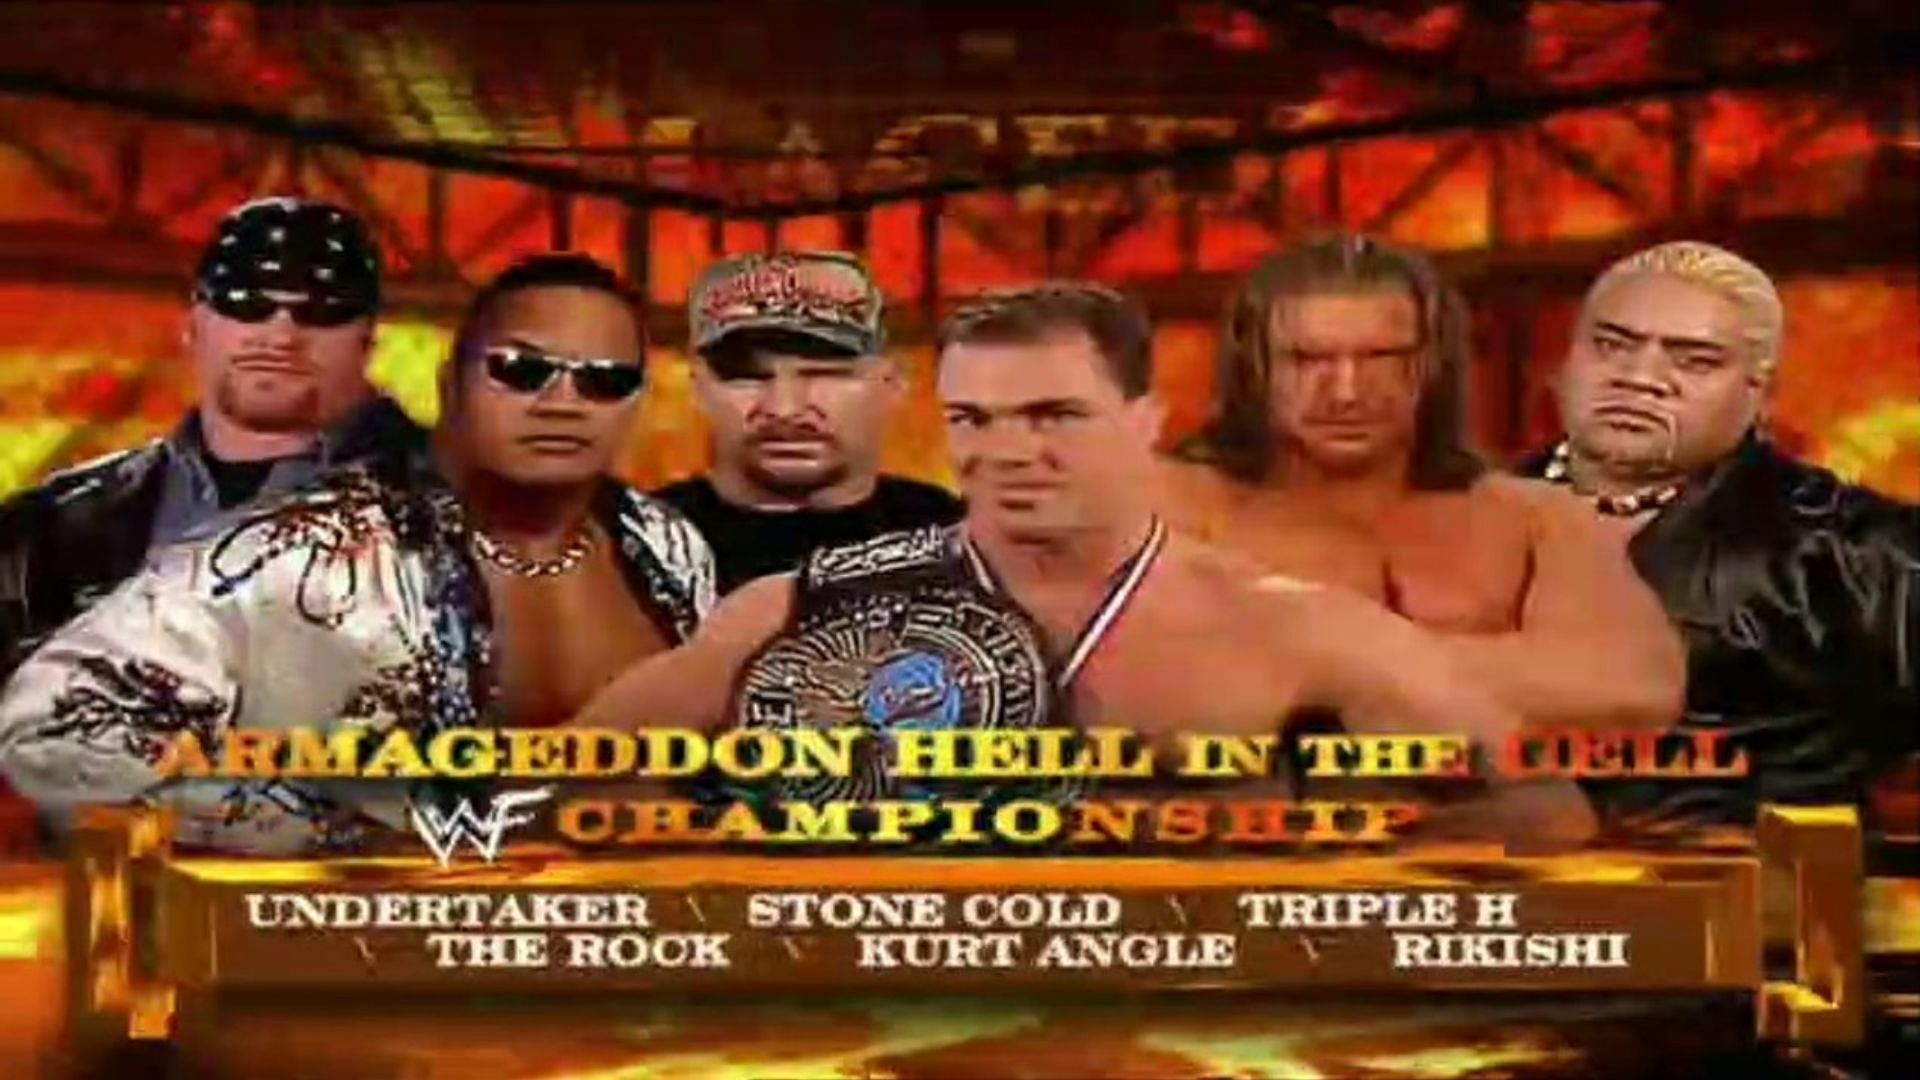 Kurt Angle walked into the first and only 6-Man Hell in a Cell match as champion